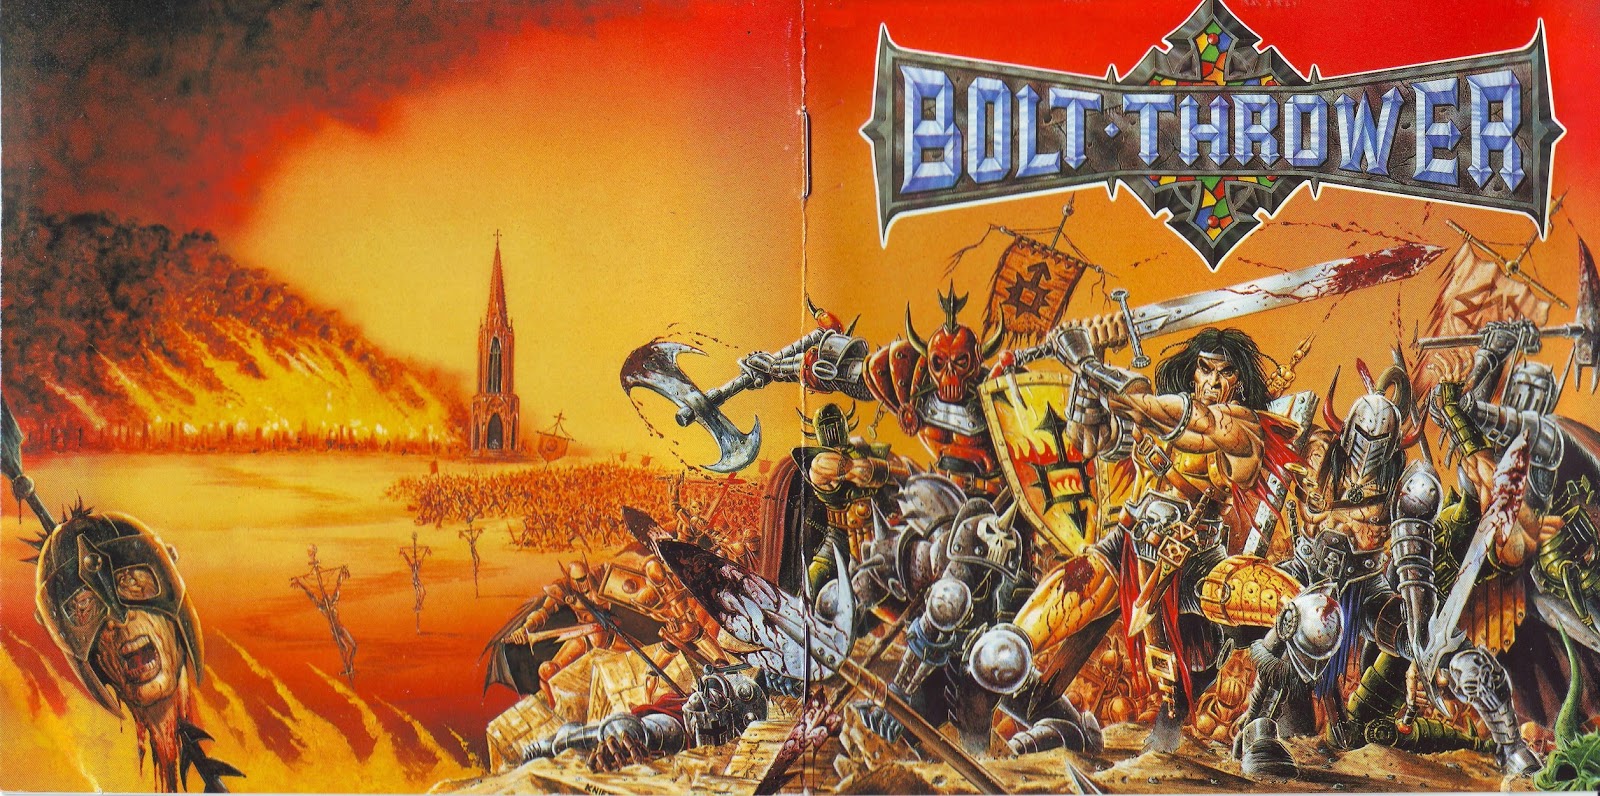 Bolt Thrower Backgrounds, Compatible - PC, Mobile, Gadgets| 1600x796 px